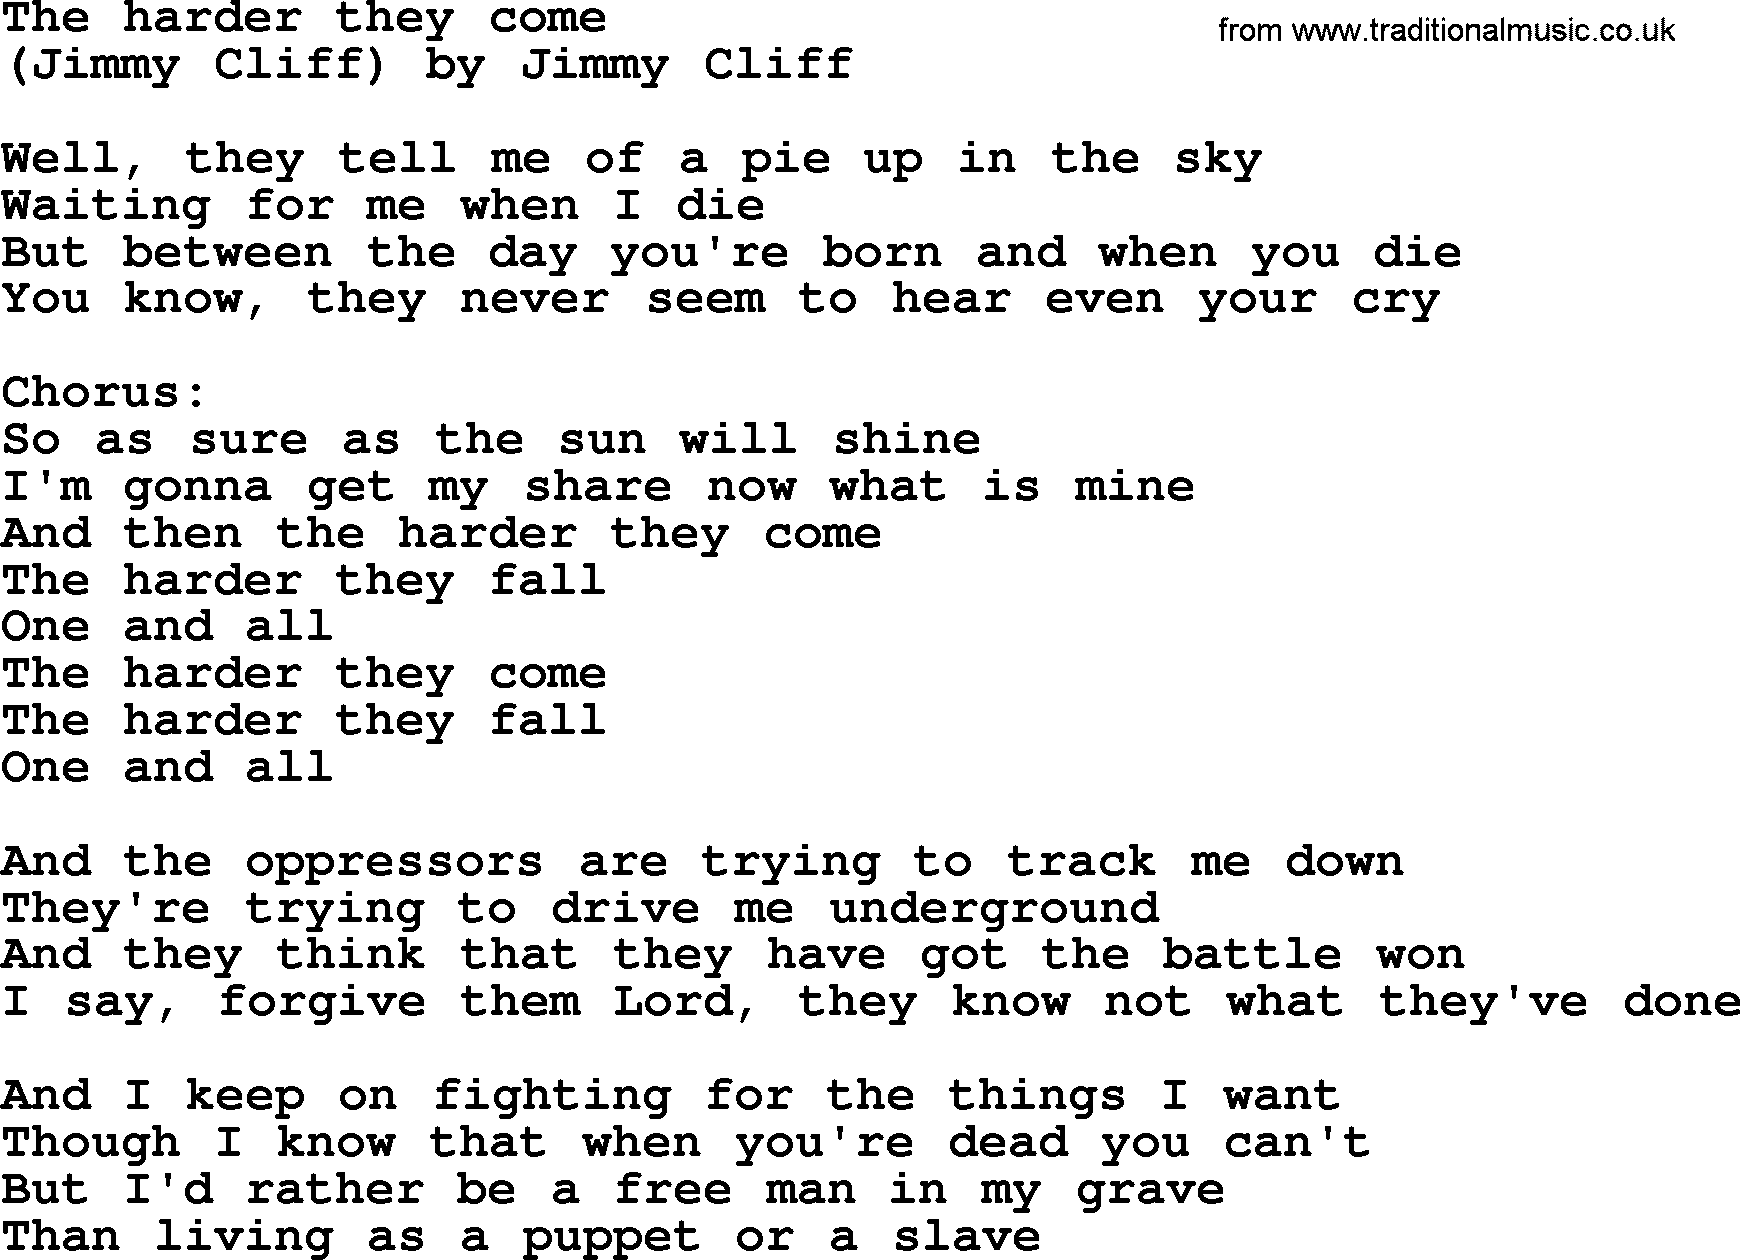 Bruce Springsteen song: The Harder They Come lyrics